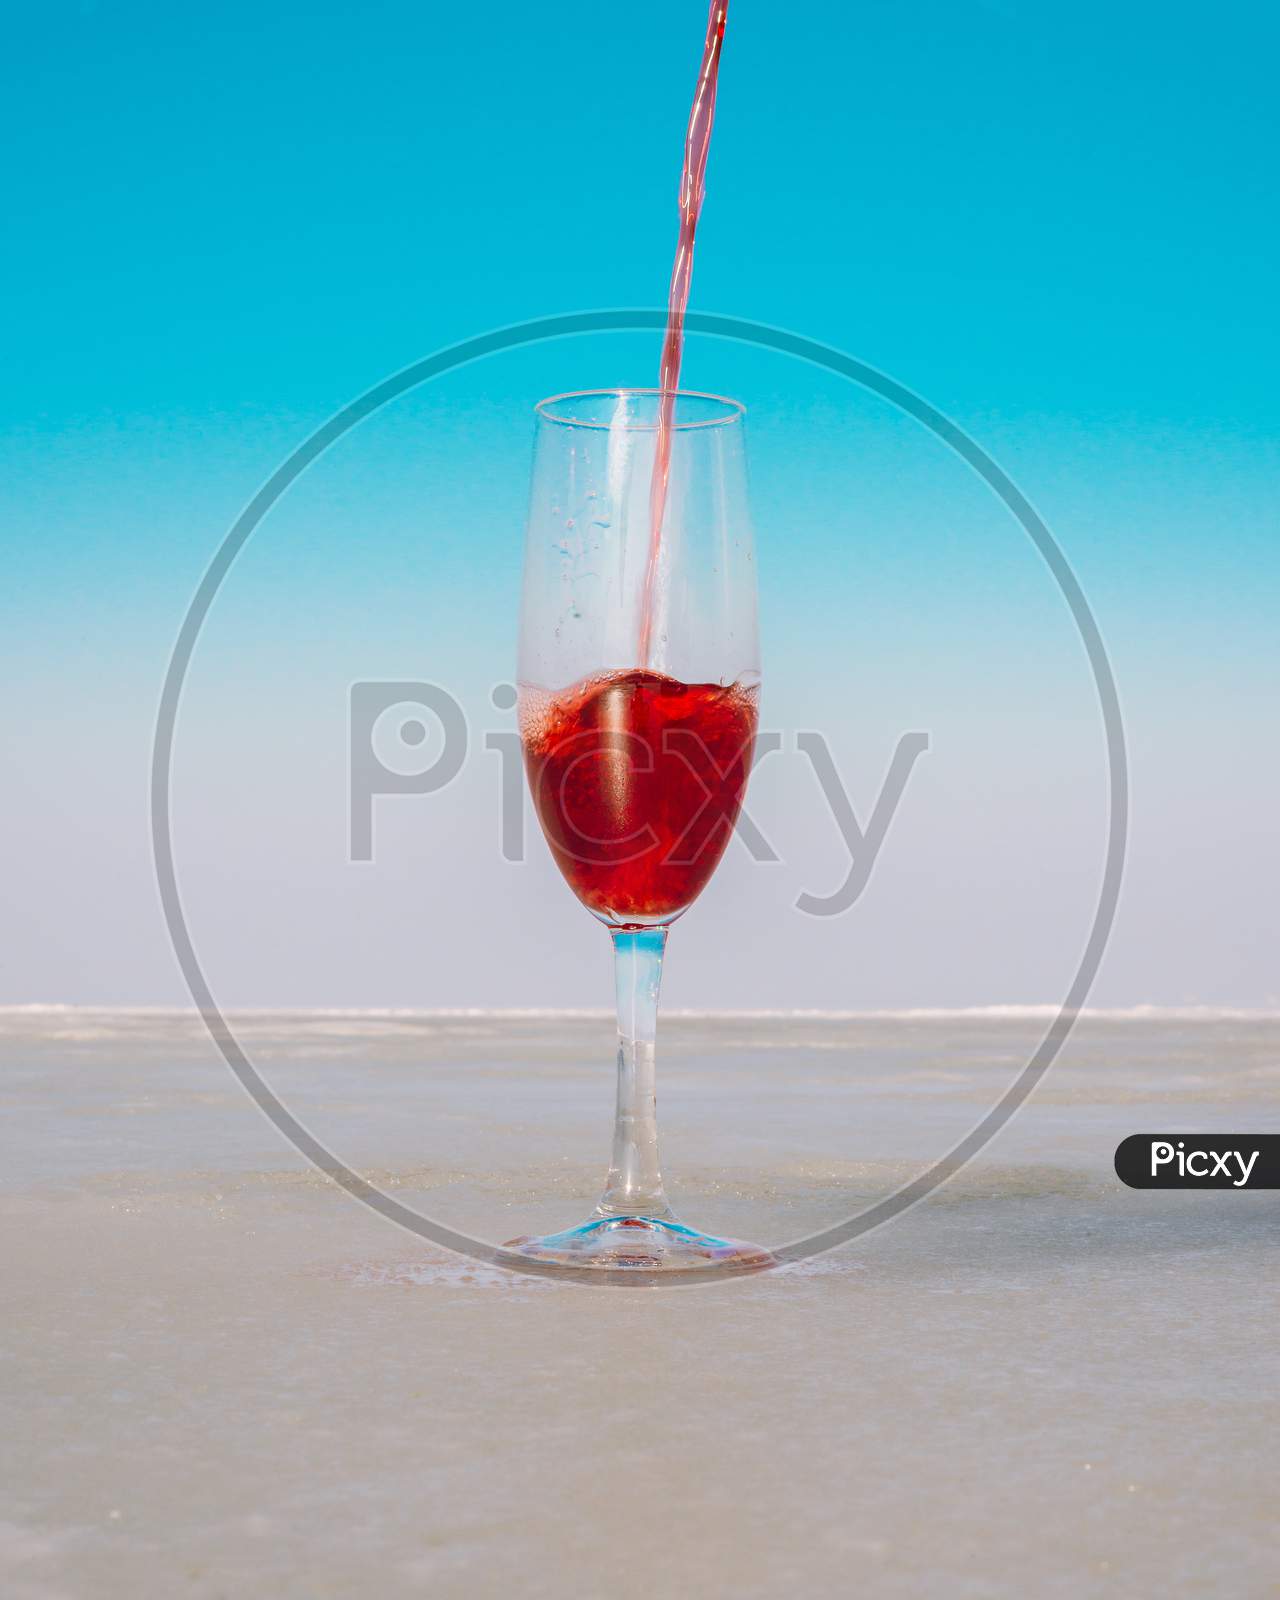 A stream of red wine is poured into a transparent glass against a blue sky on a sea coast